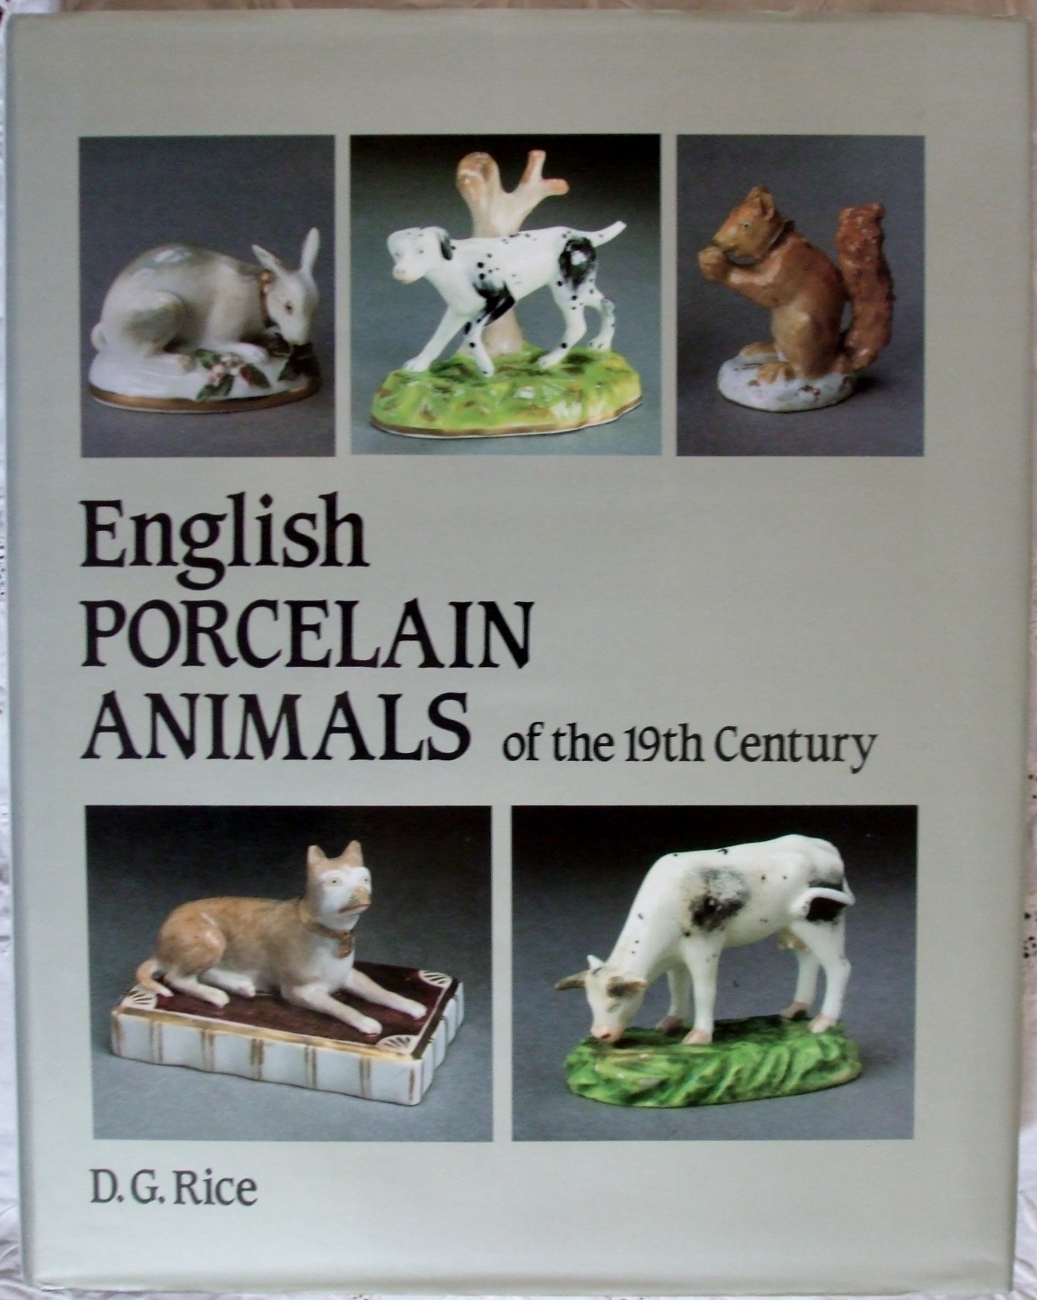 English porcelain animals of the 19th century